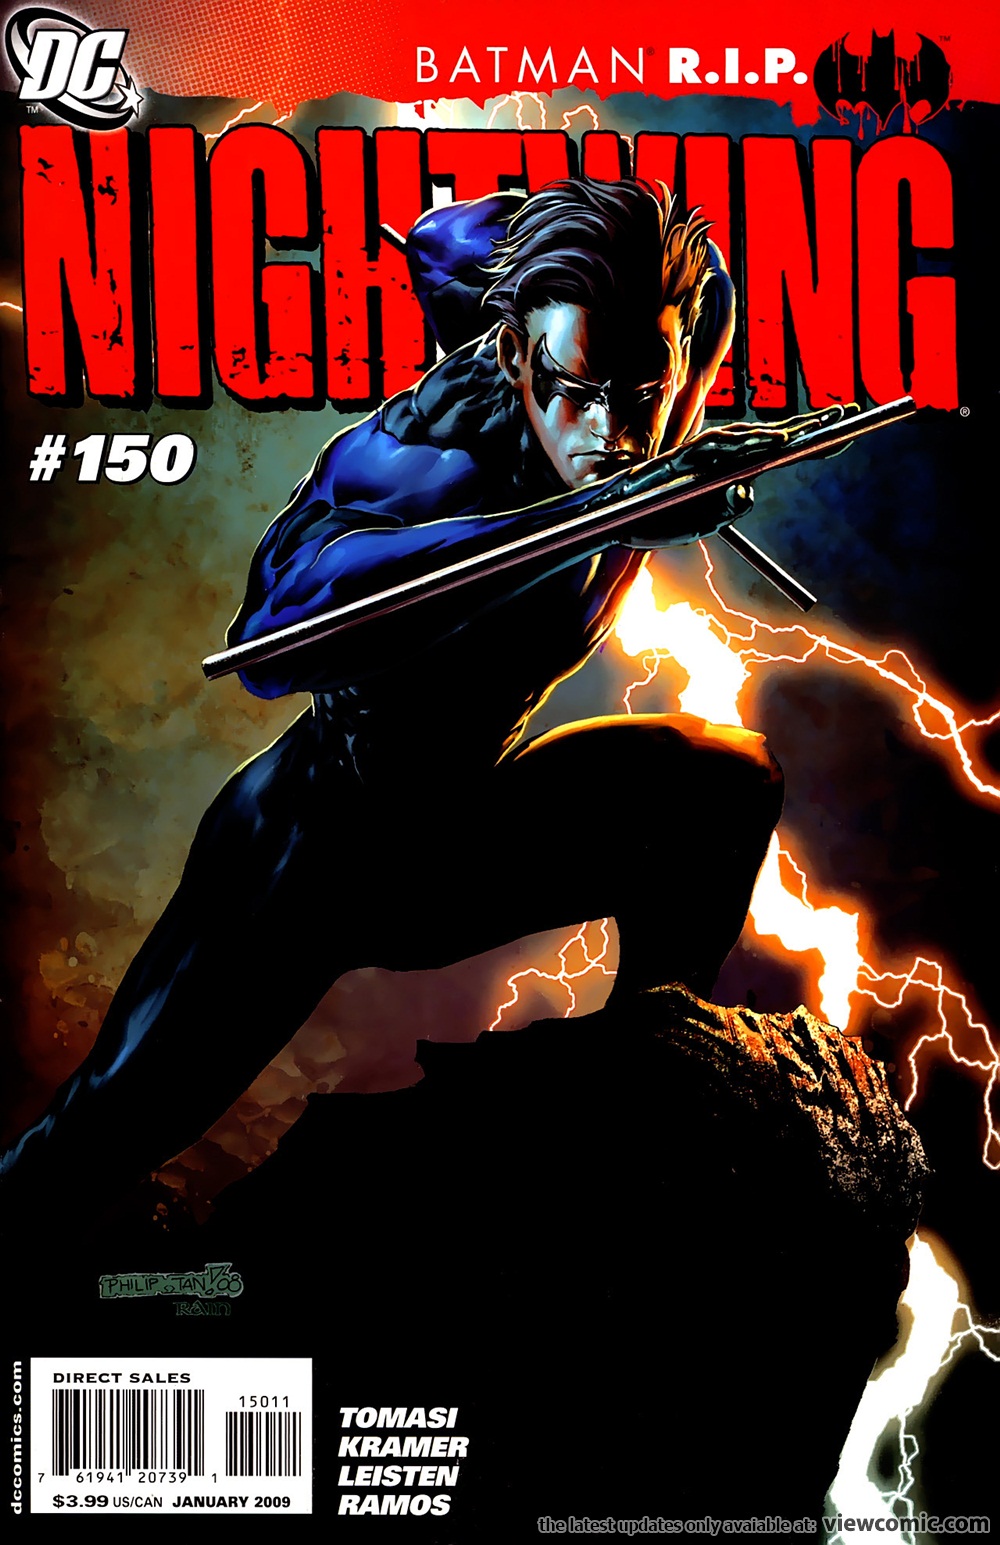 Batman Rip Nightwing 150 2009 | Read Batman Rip Nightwing 150 2009 comic  online in high quality. Read Full Comic online for free - Read comics online  in high quality .| READ COMIC ONLINE